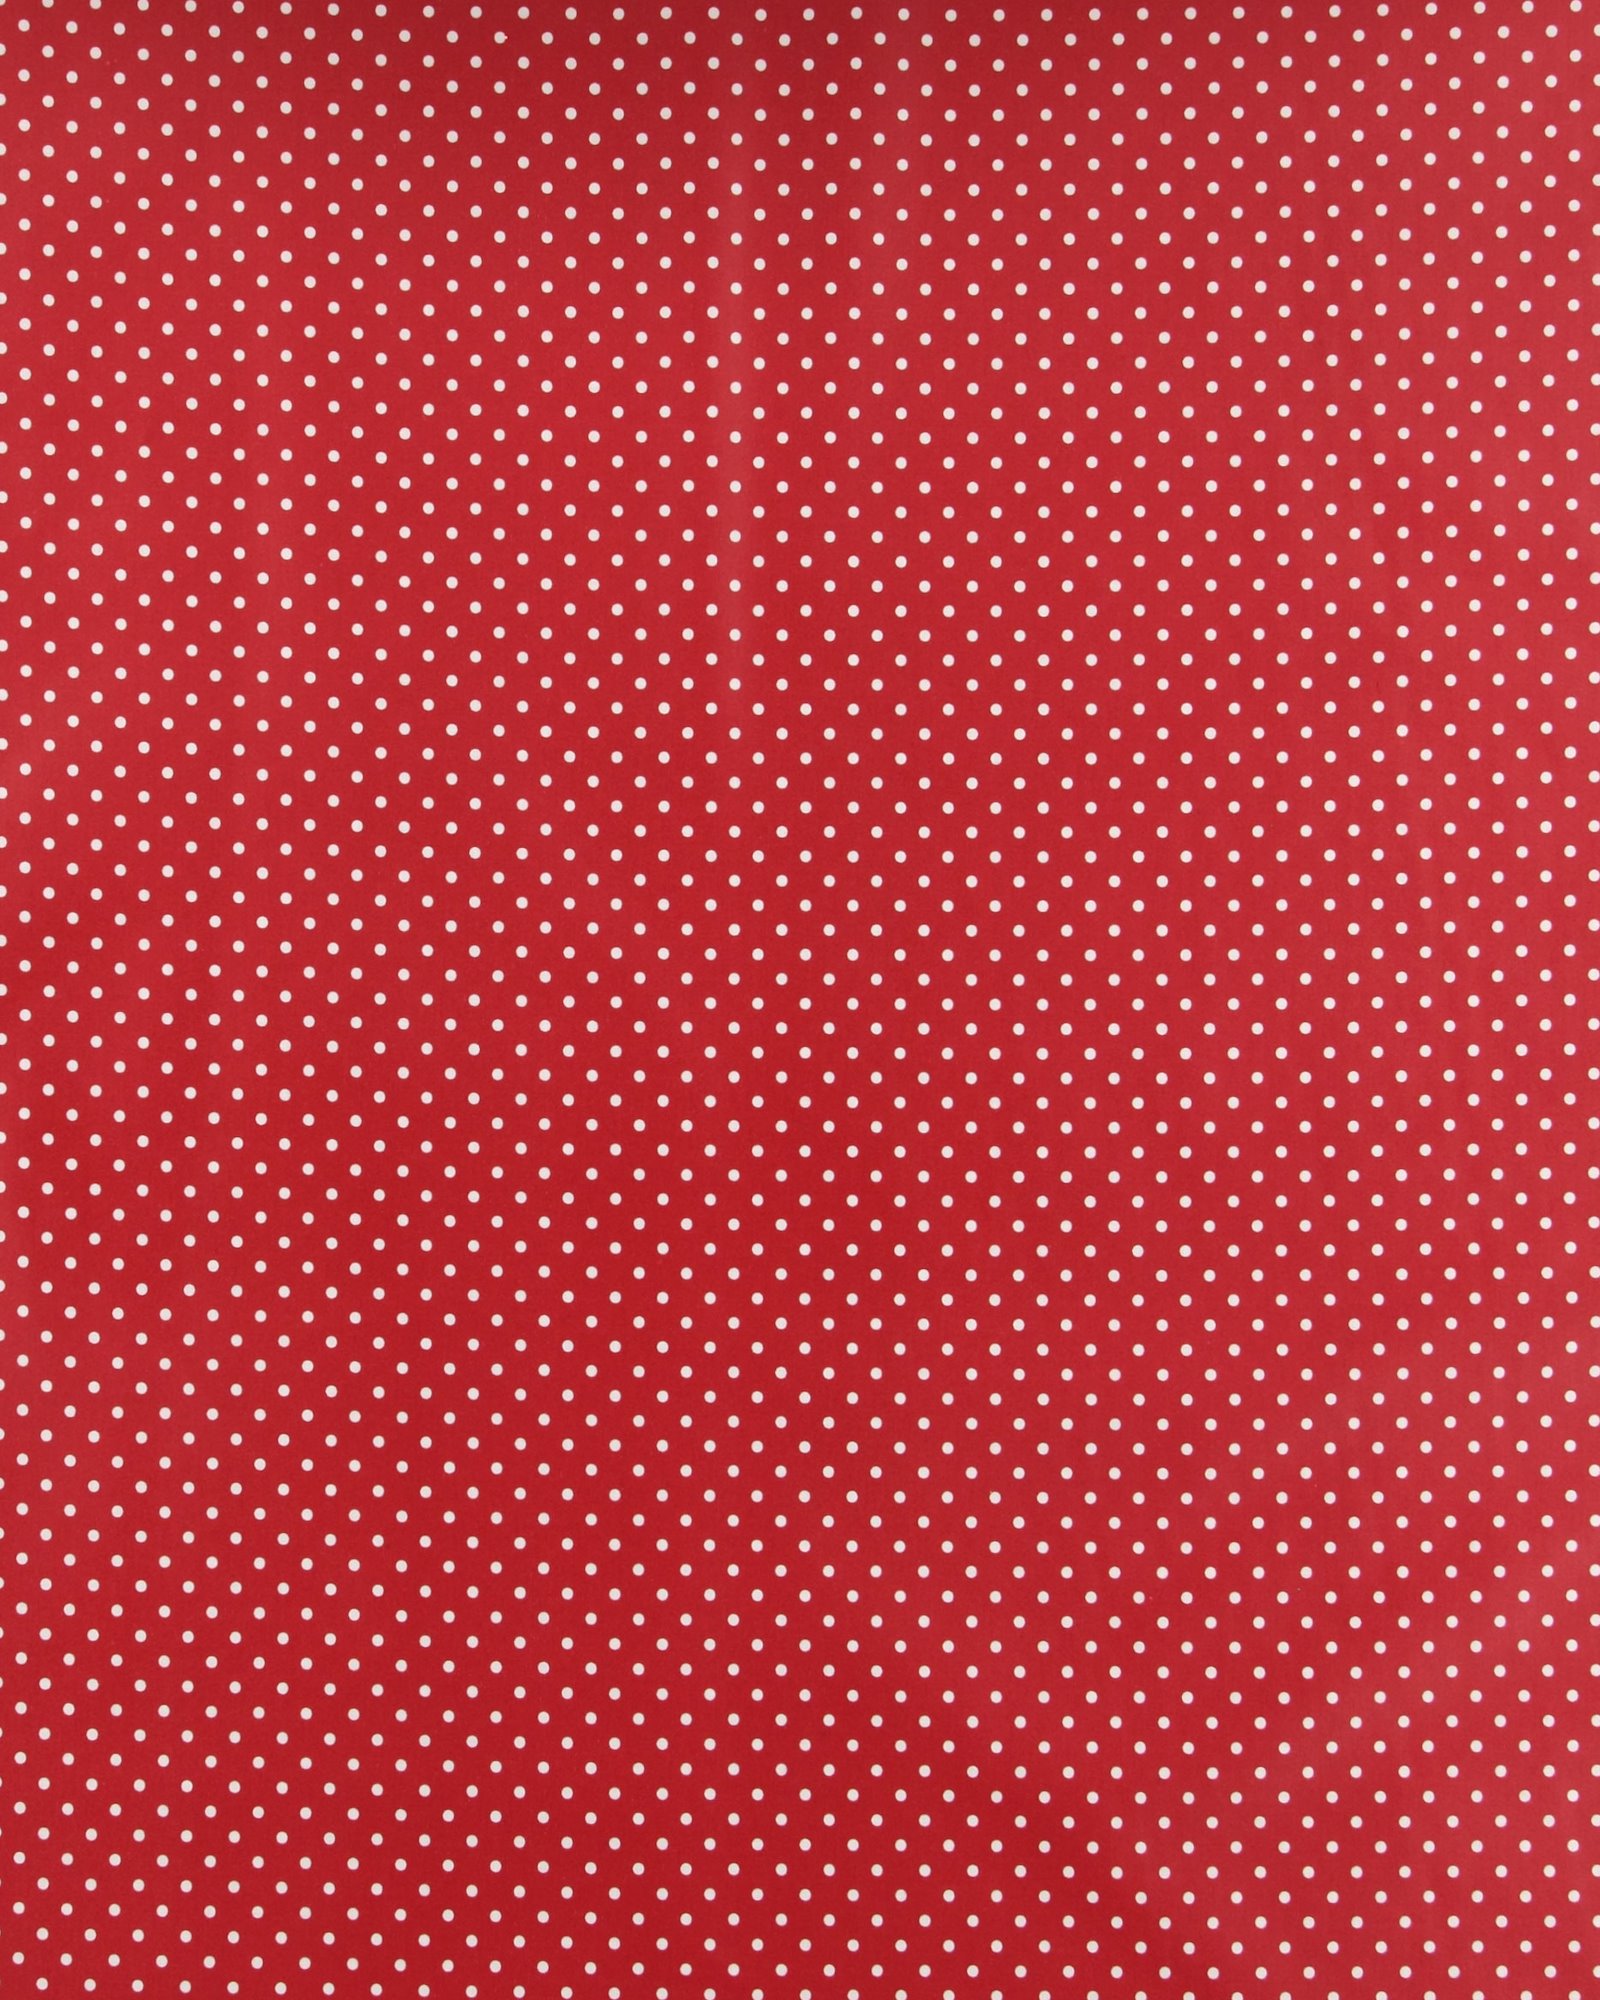 Woven oilcloth red w white dots 860161_pack_sp